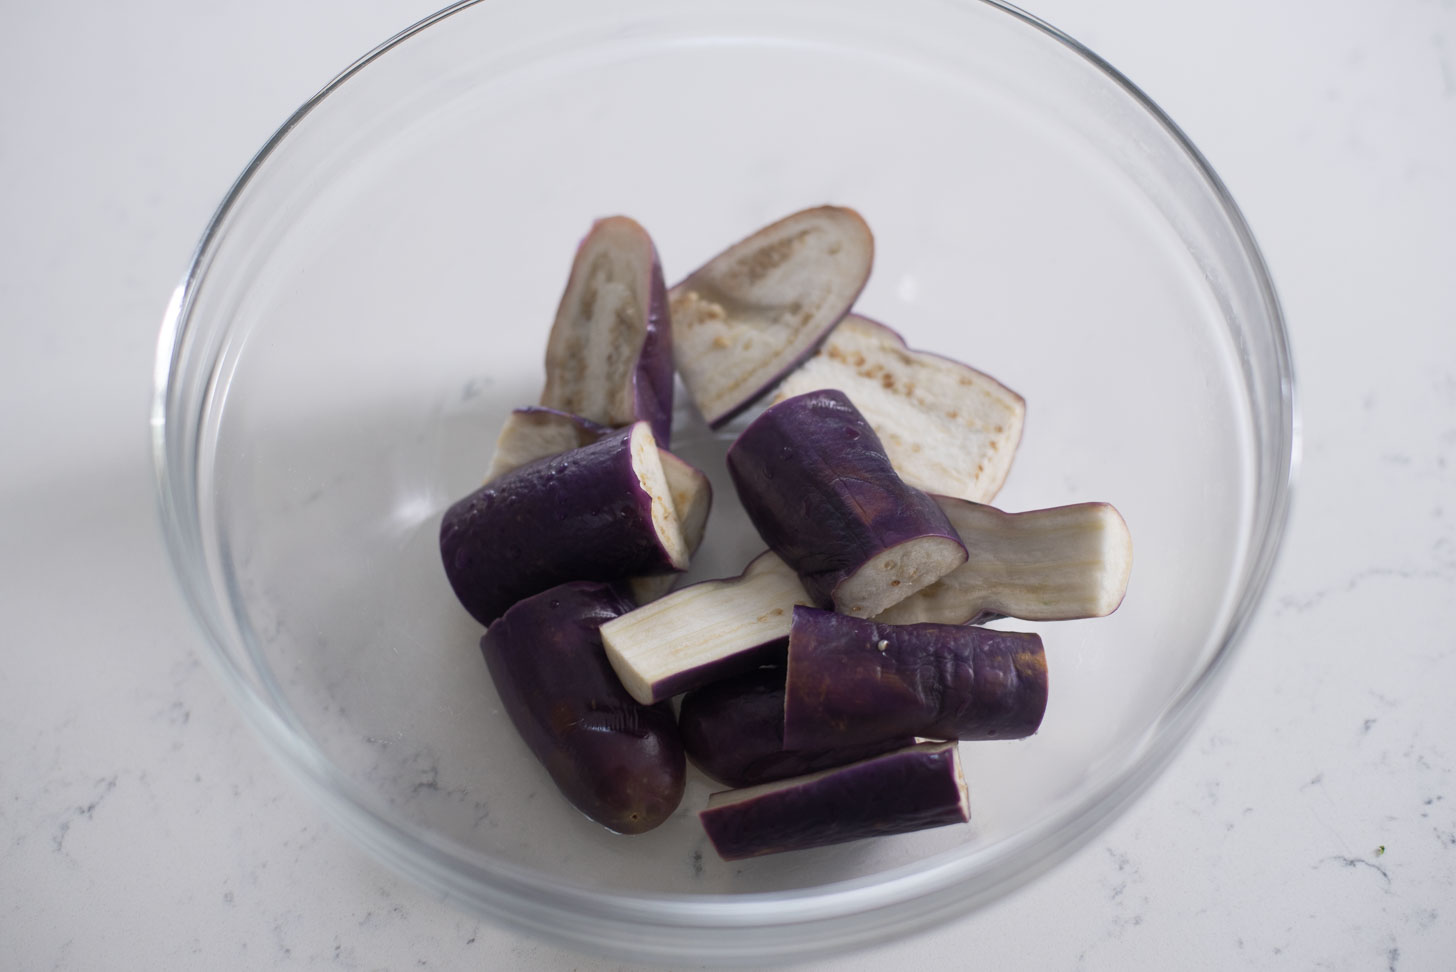 Steamed eggplants are cooling in a bowl.